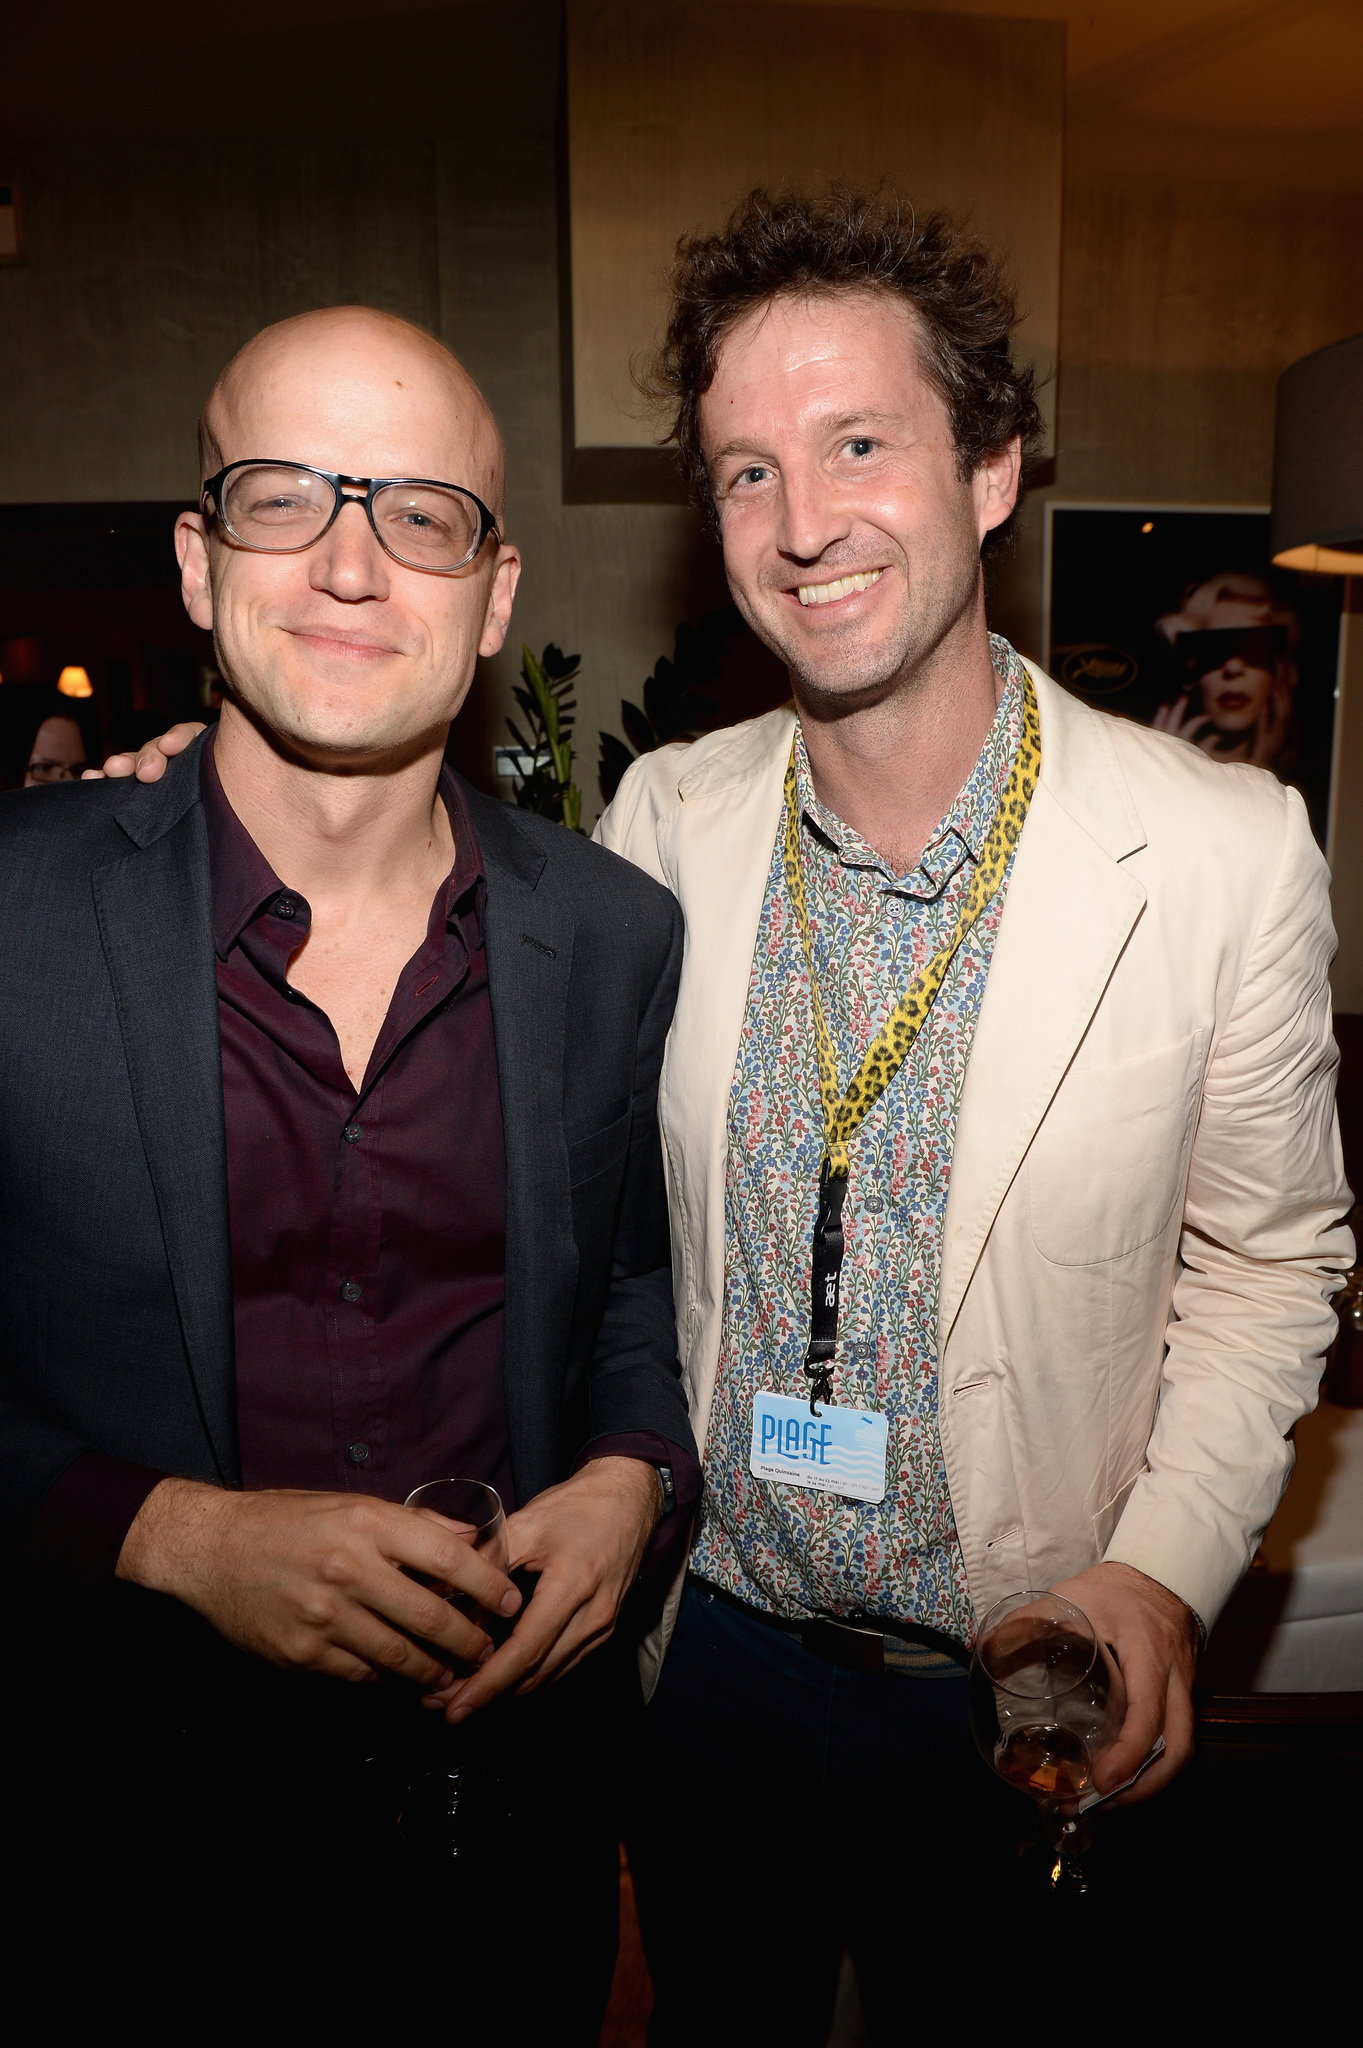 New York Times' Logan Hill and Sundance Film Festival's Trever Groth attend the IMDB's 2013 Cannes Film Festival Dinner Party during the 66th Annual Cannes Film Festival at Restaurant Mantel on May 20, 2013 in Cannes, France.